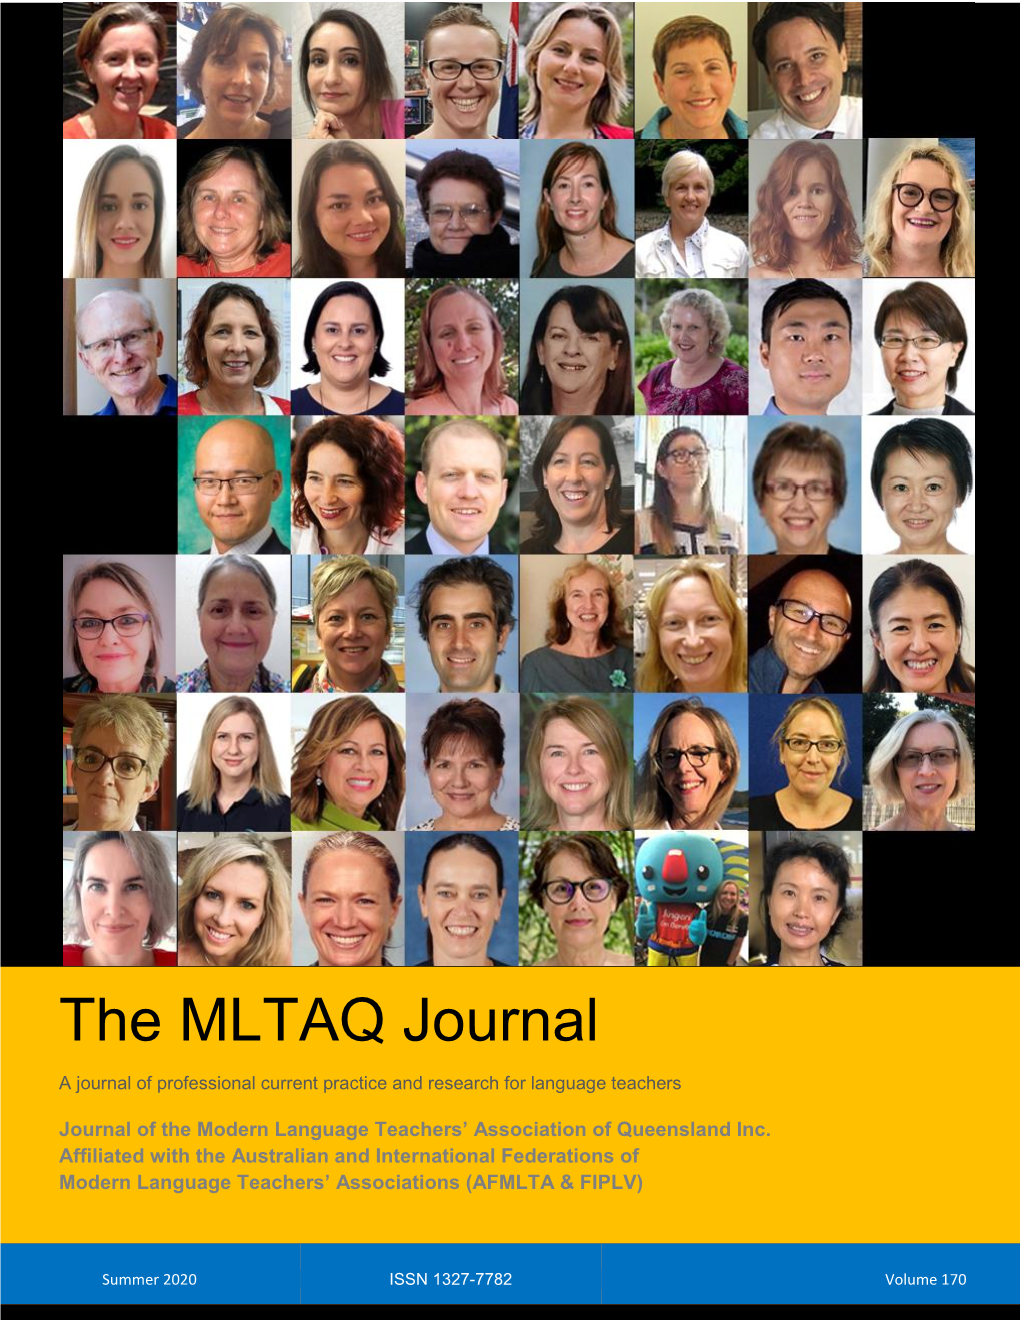 The MLTAQ Journal a Journal of Professional Current Practice and Research for Language Teachers